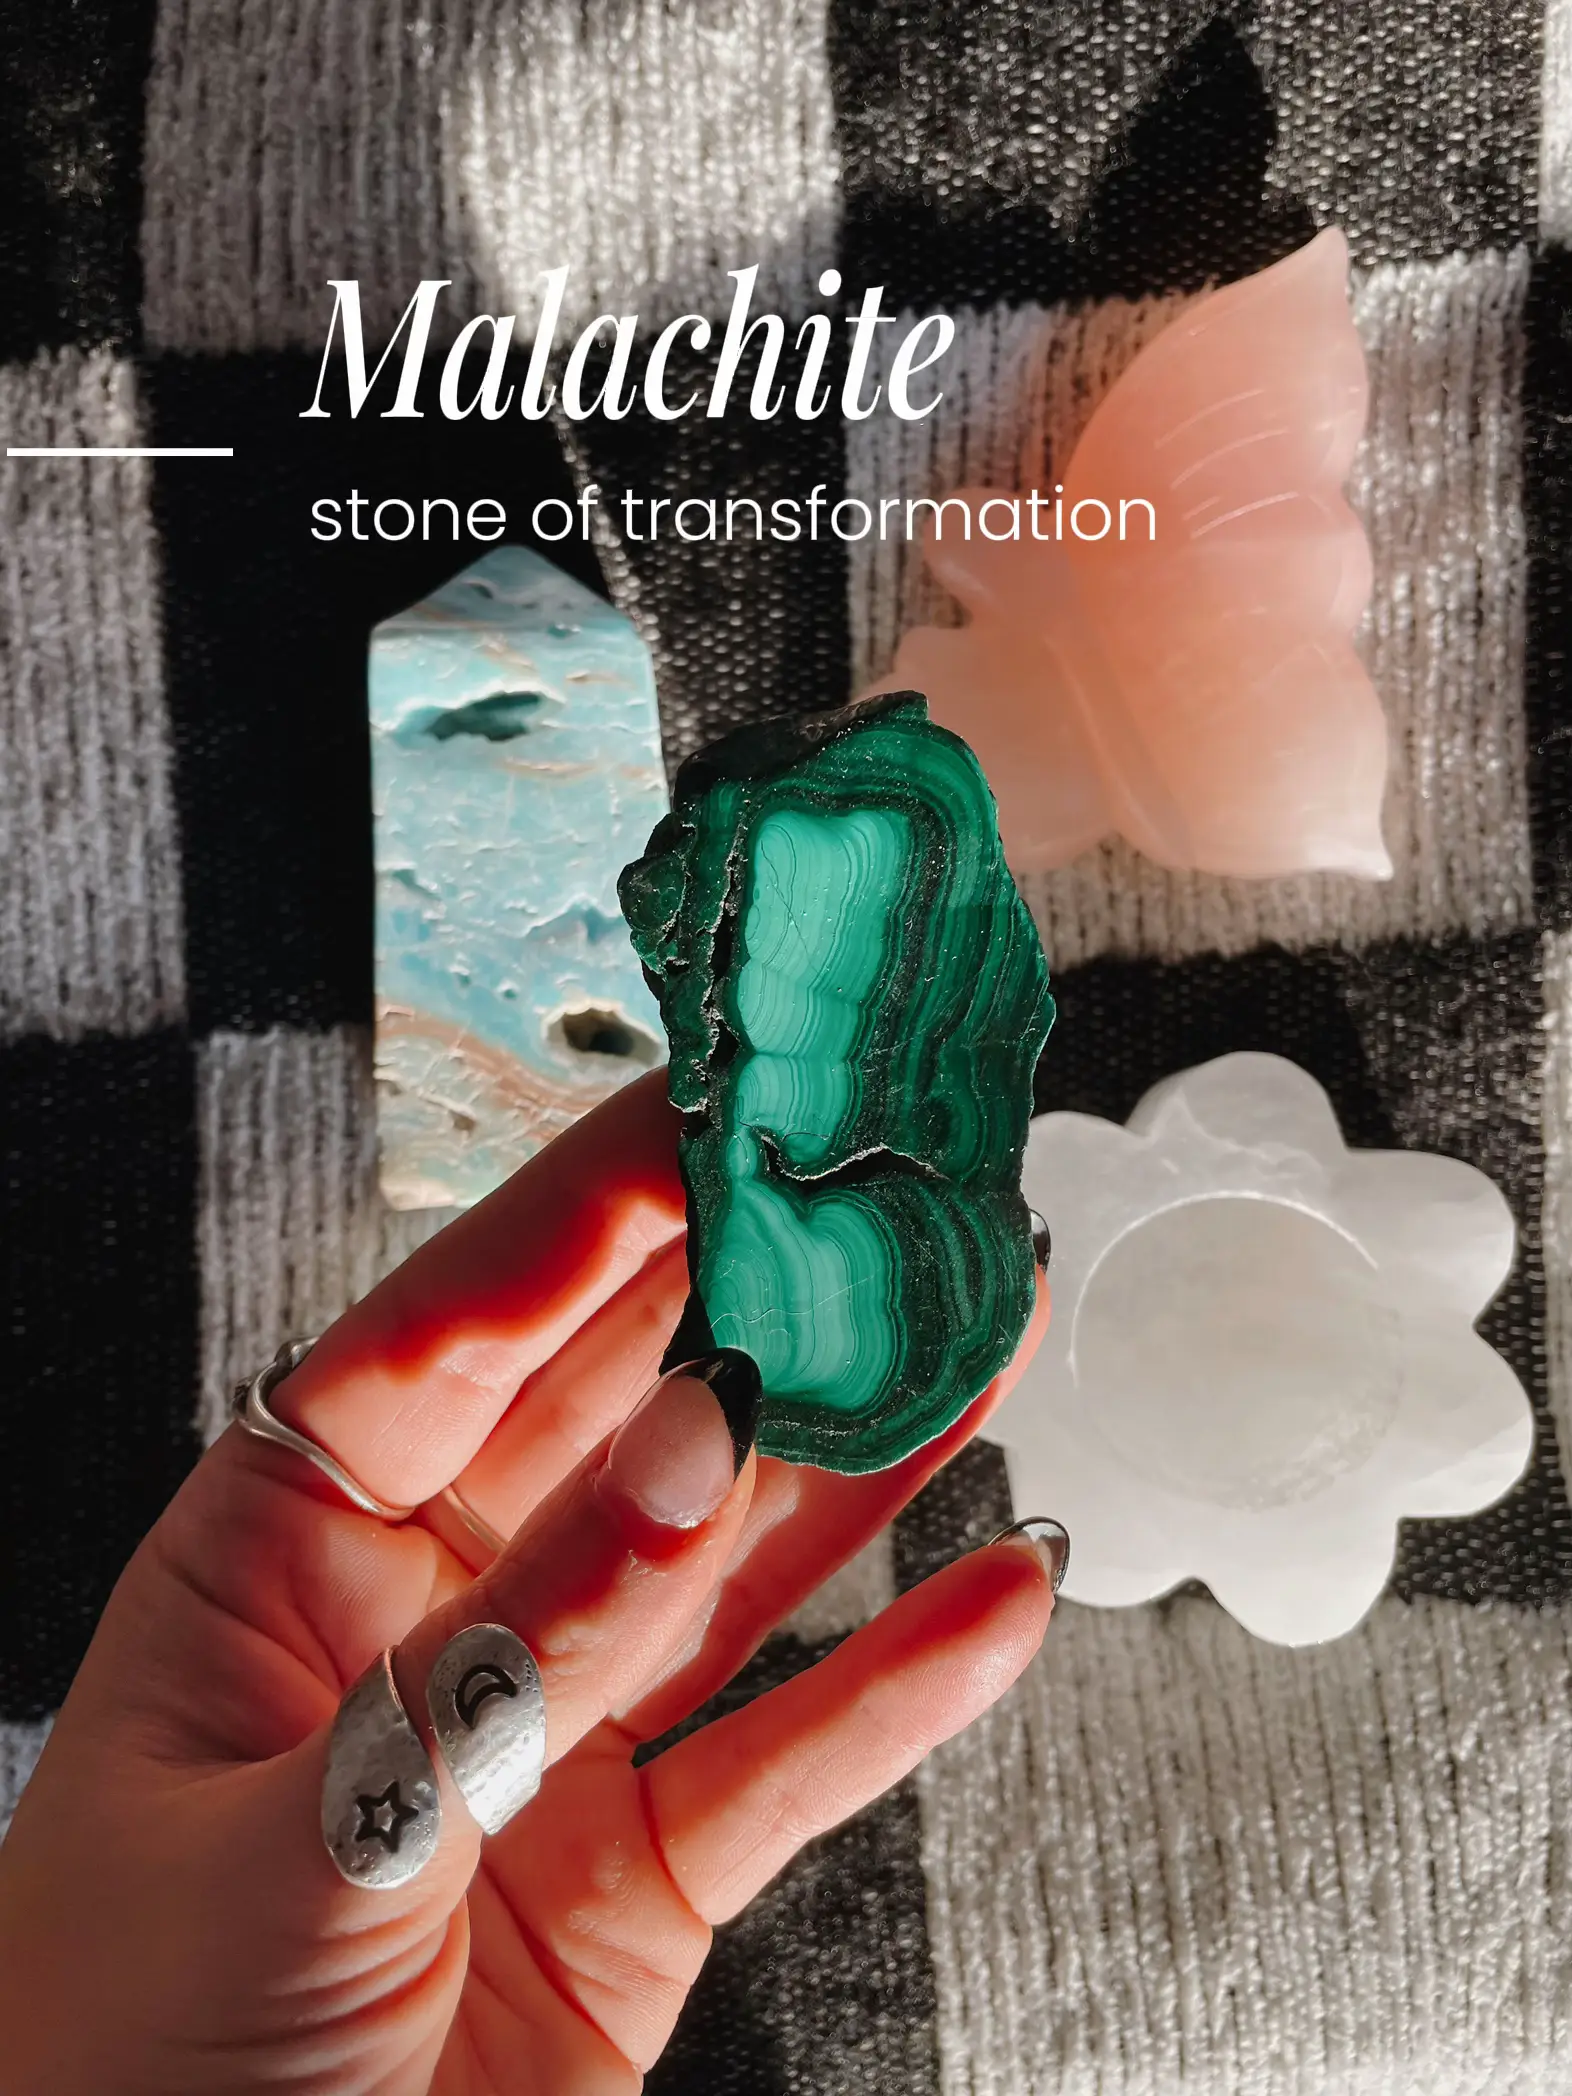 Malachite Crystal - Meaning & Understanding 🔮's images